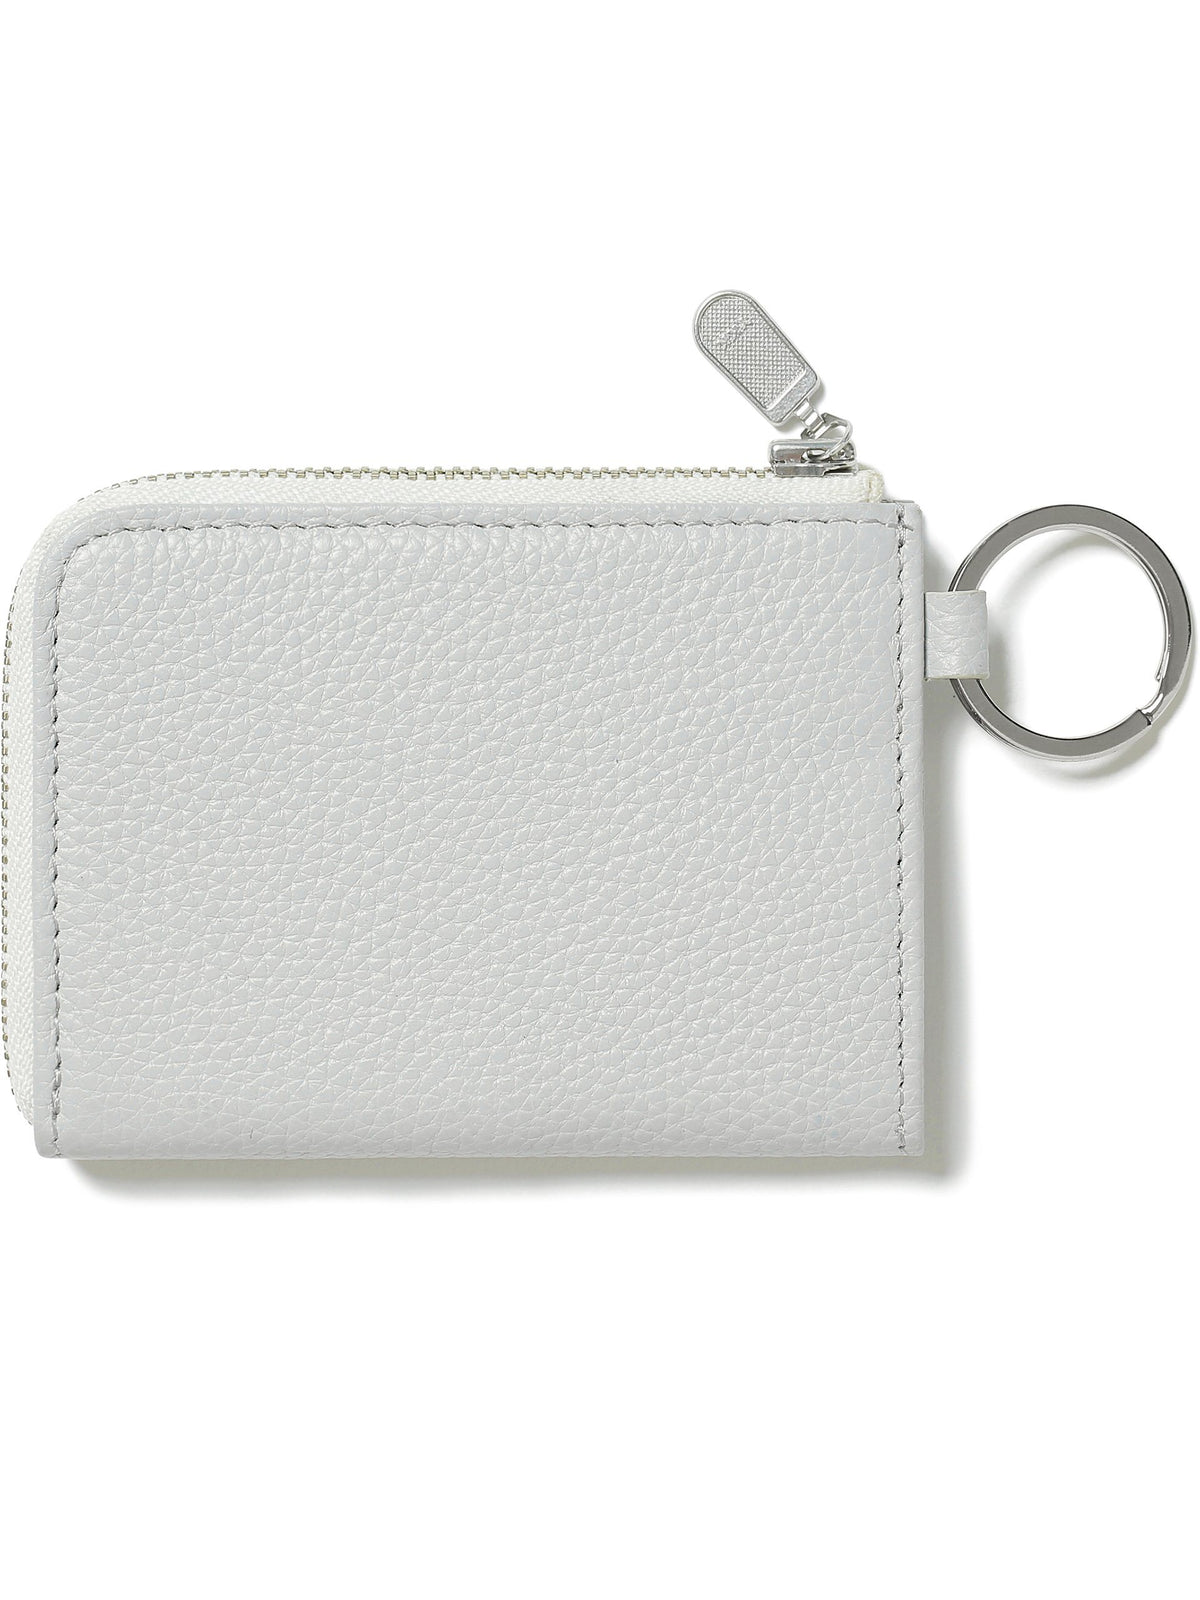 Leather Zip Wallet Accessory 